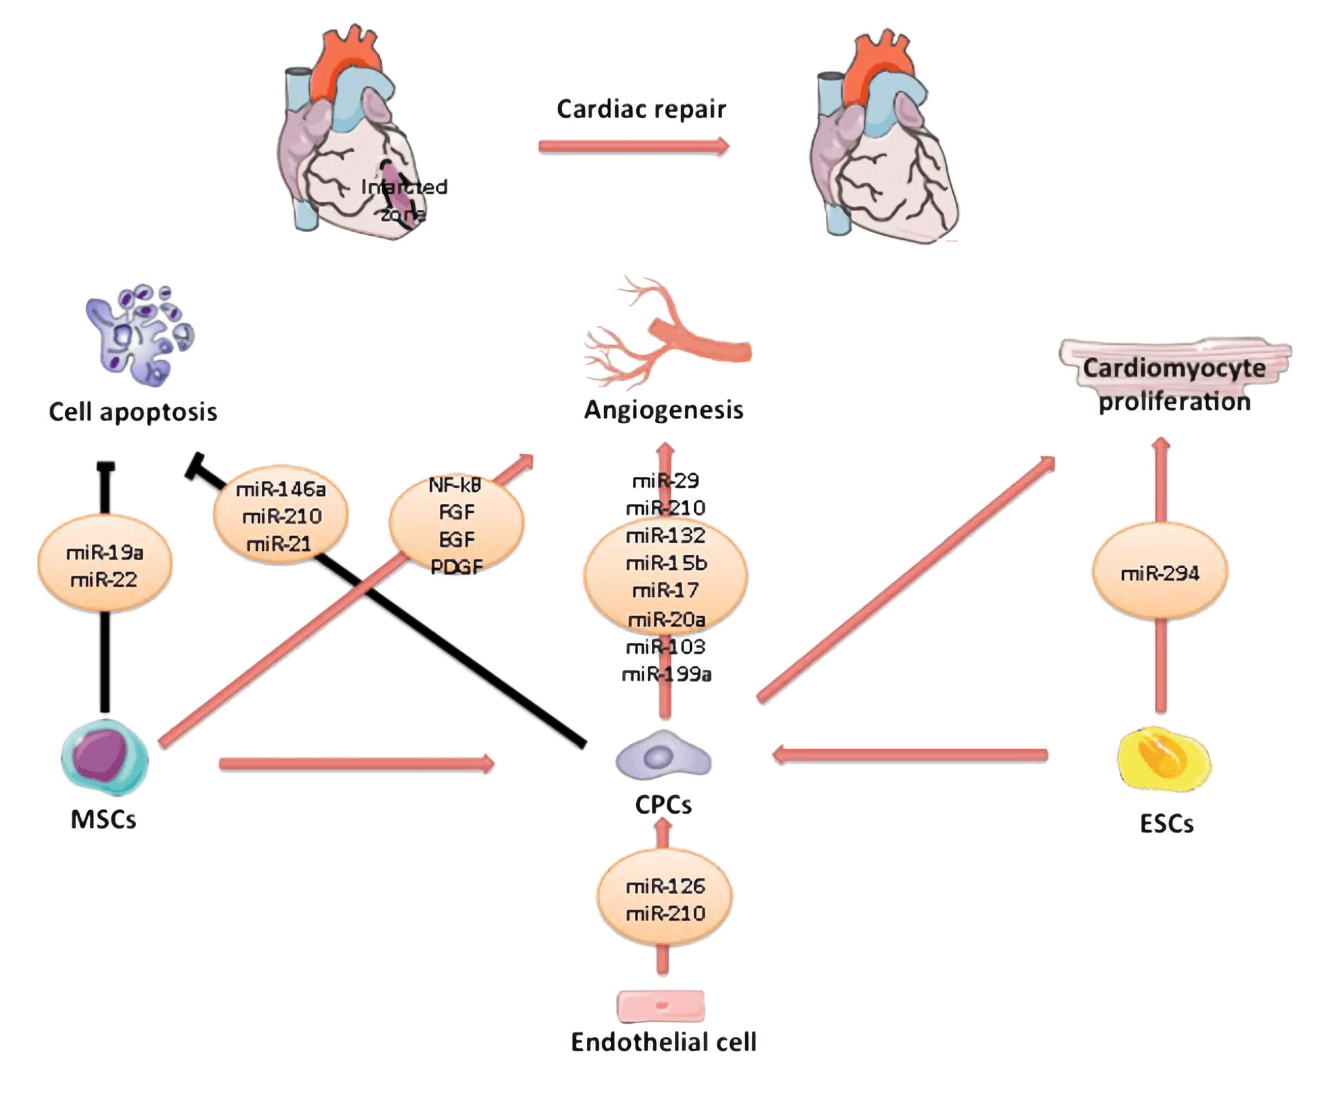 Exosomes released from mesenchymal stem cells (MSCs), cardiac progenitor cells (CPCs), and embryonic stem cells (ESCs) participate cardiac repair after myocardial infarction through inhibition of cell apoptosis, stimulation of angiogenesis, and cardiomyocytes proliferation.